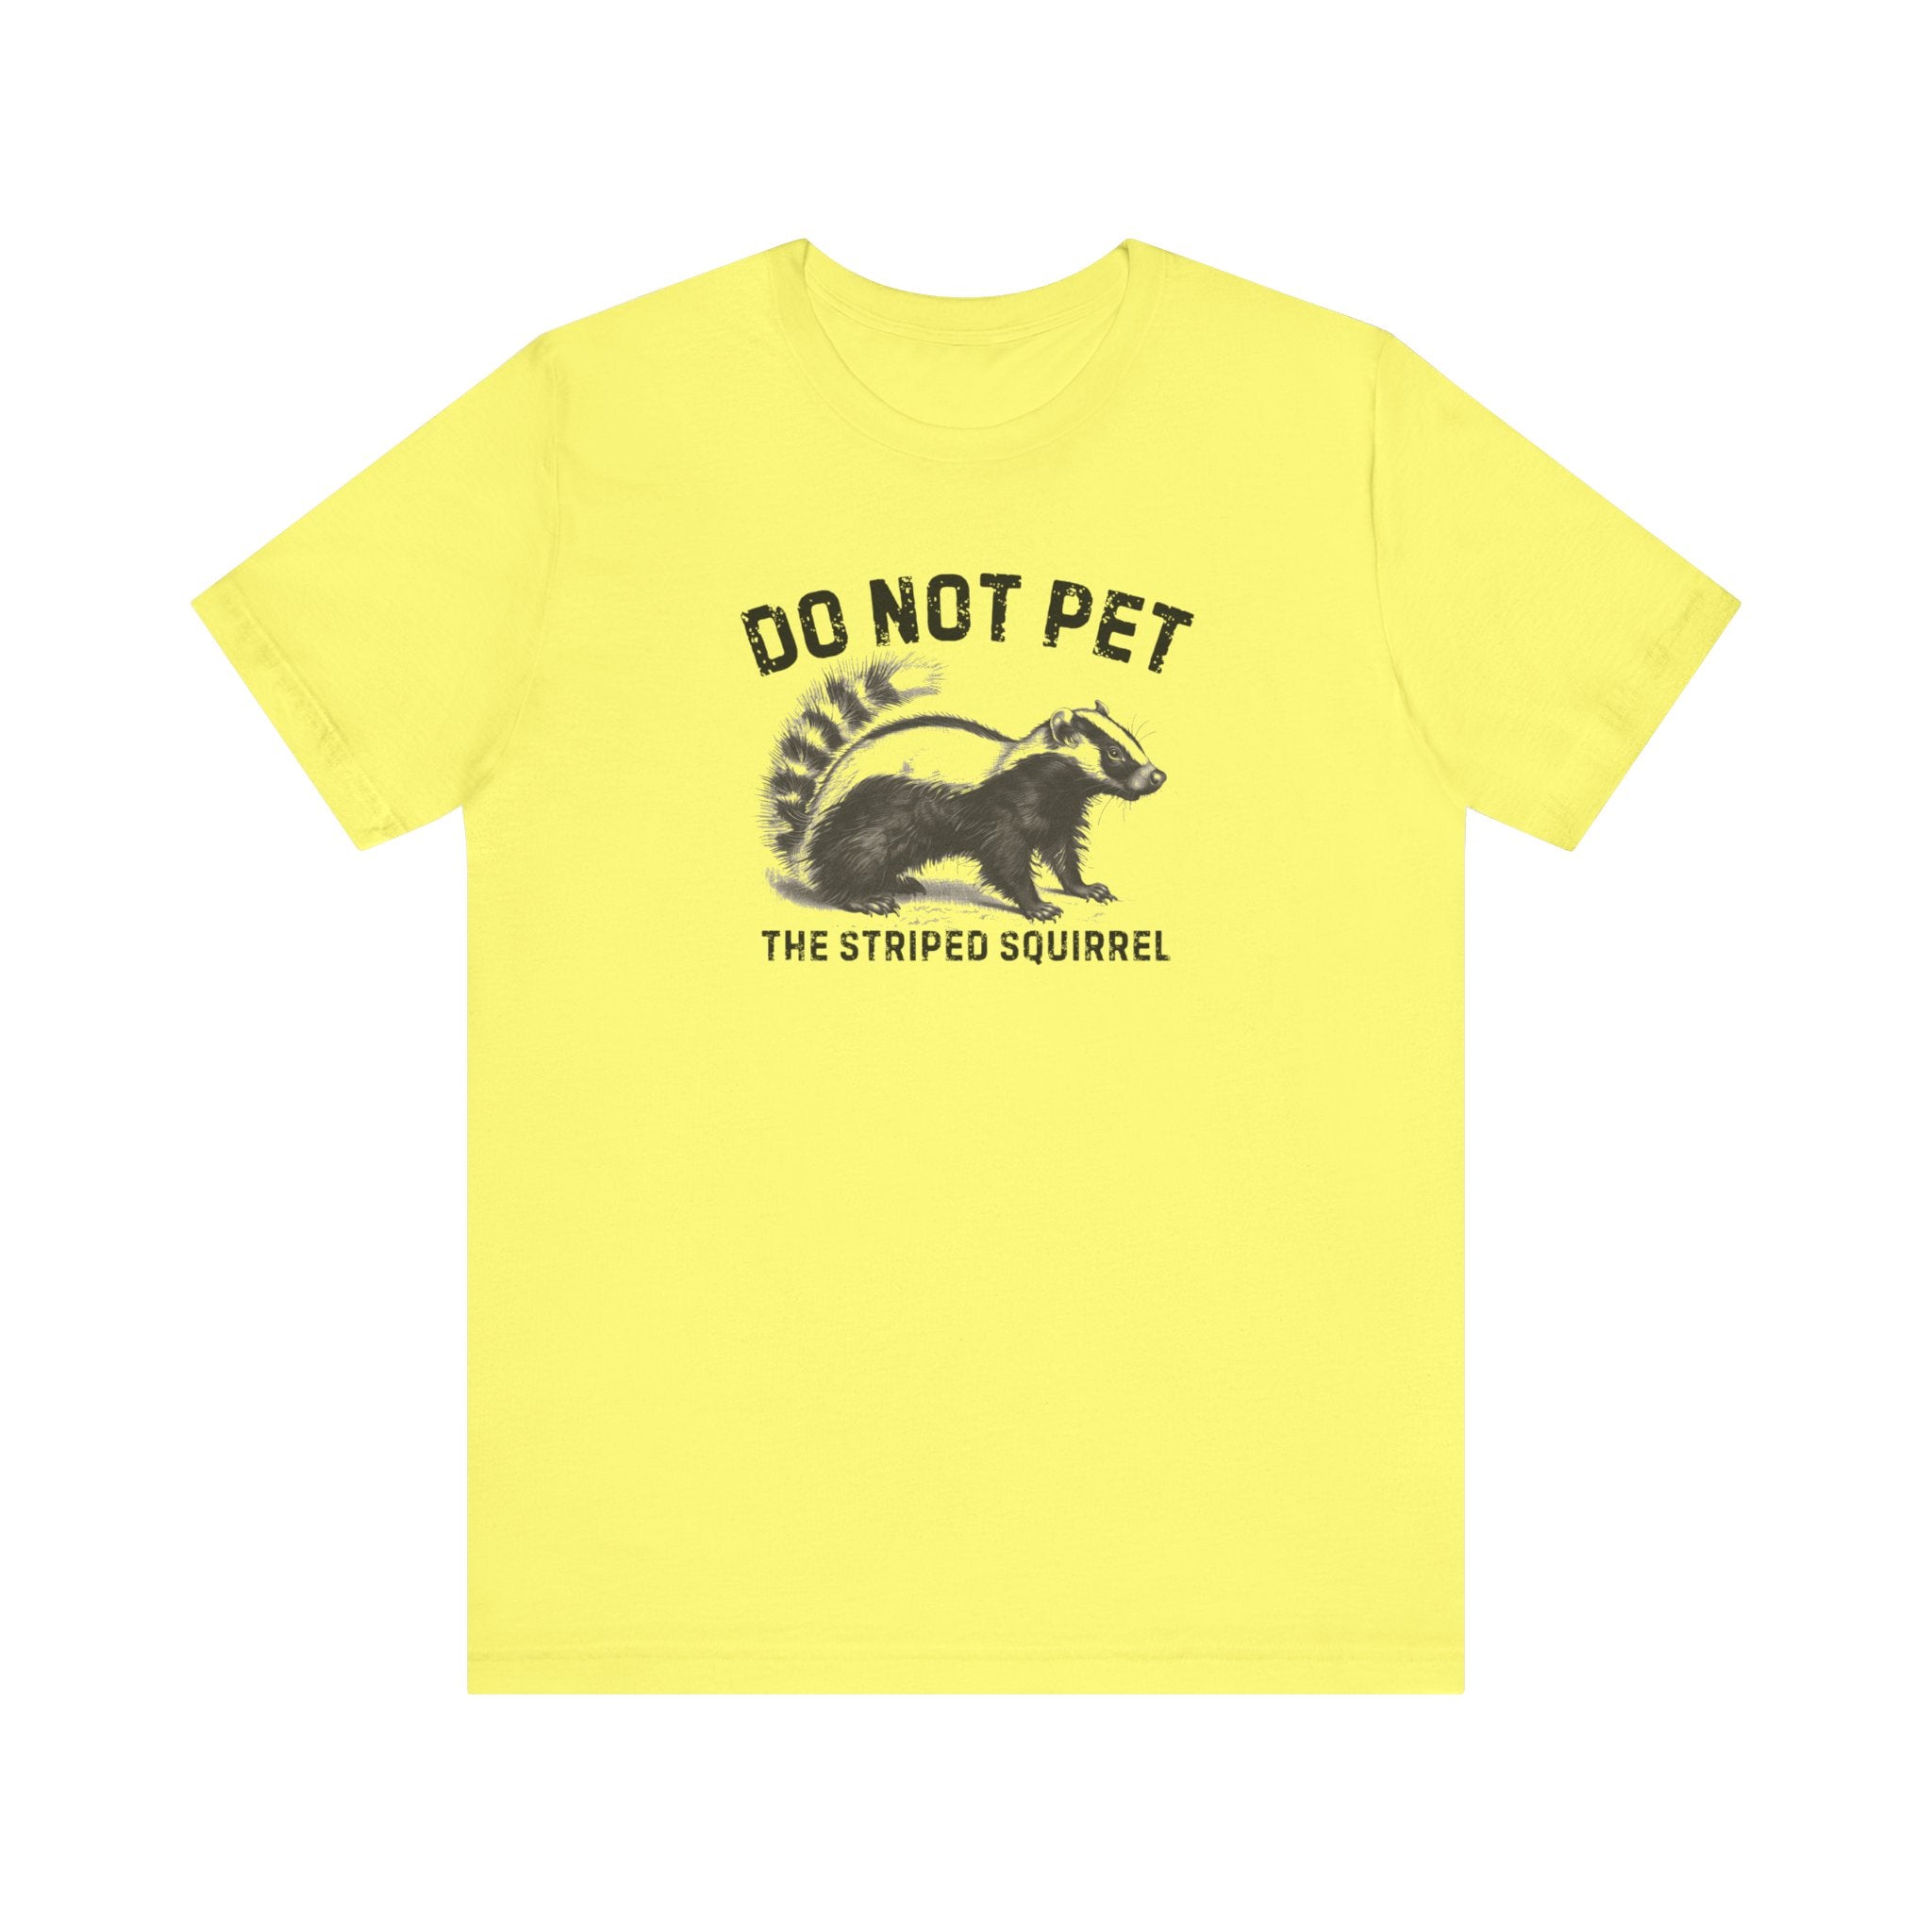 Do Not Pet The Striped Squirrel Shirt Funny Animal Lover Tee